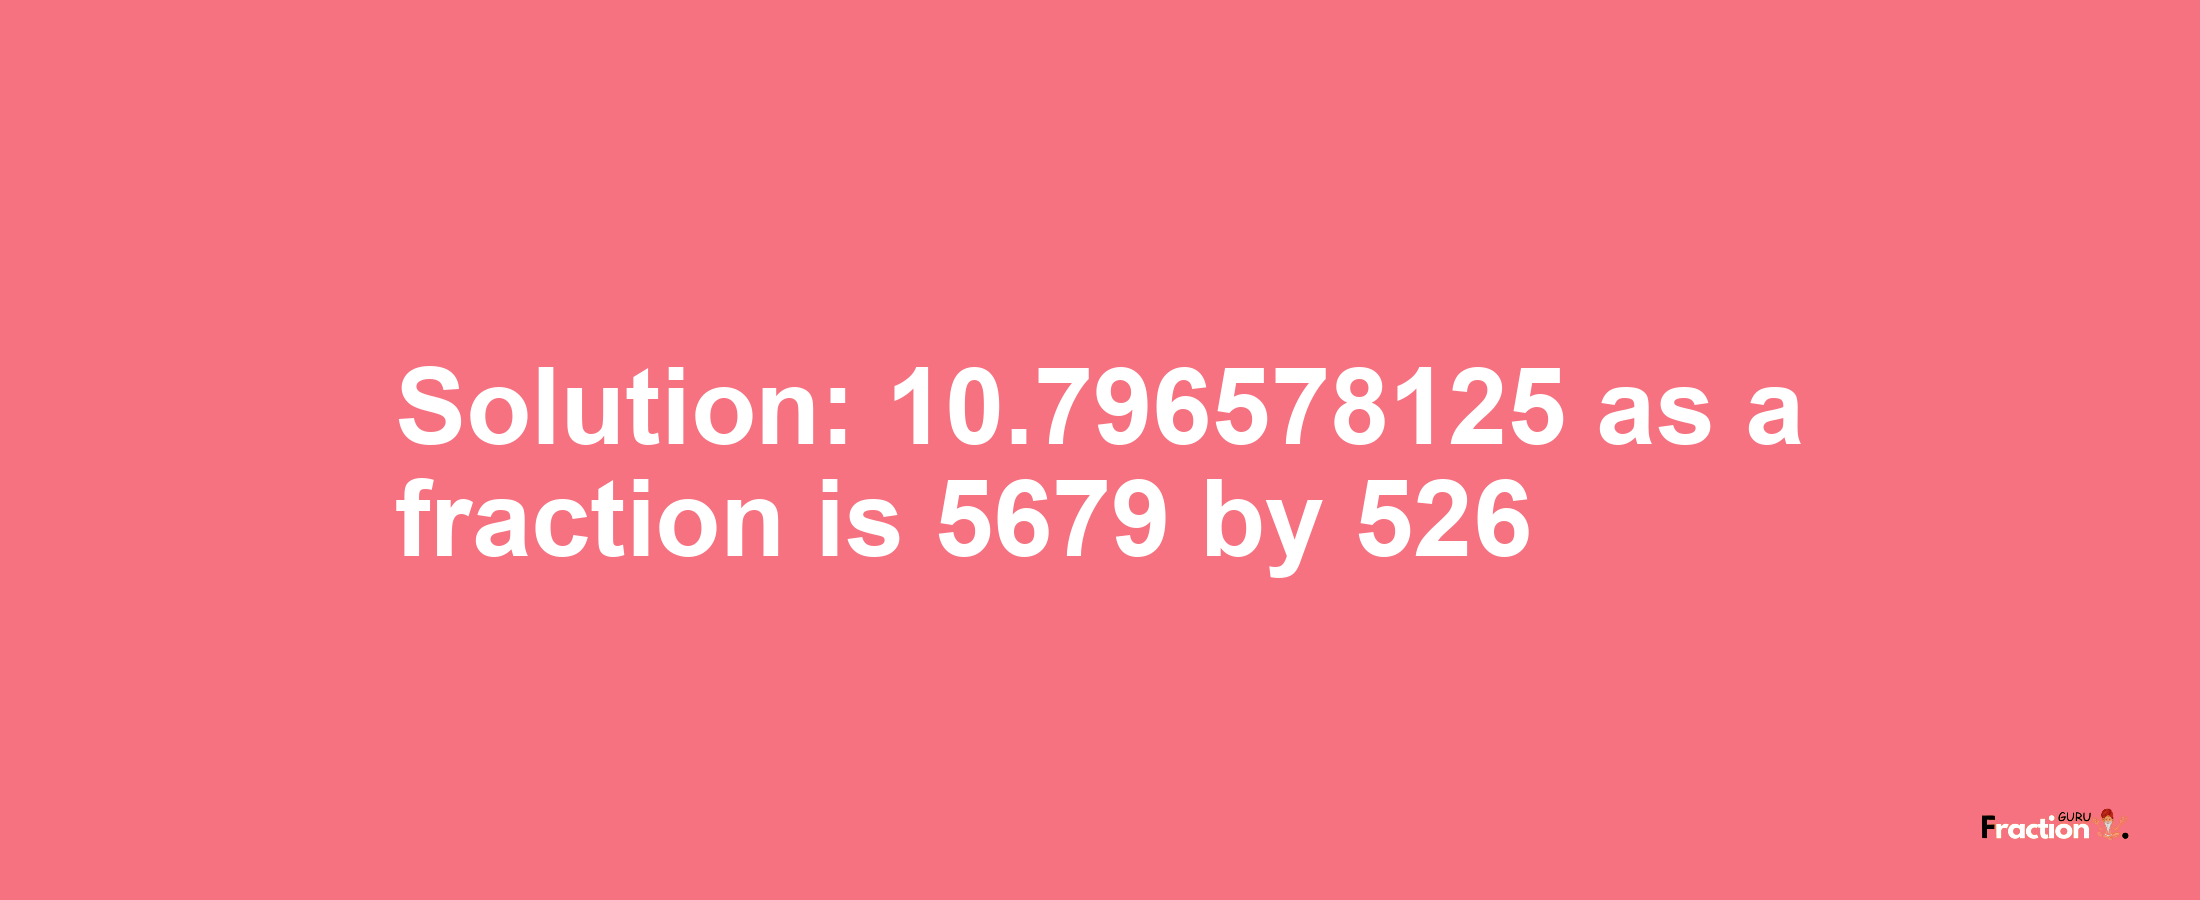 Solution:10.796578125 as a fraction is 5679/526